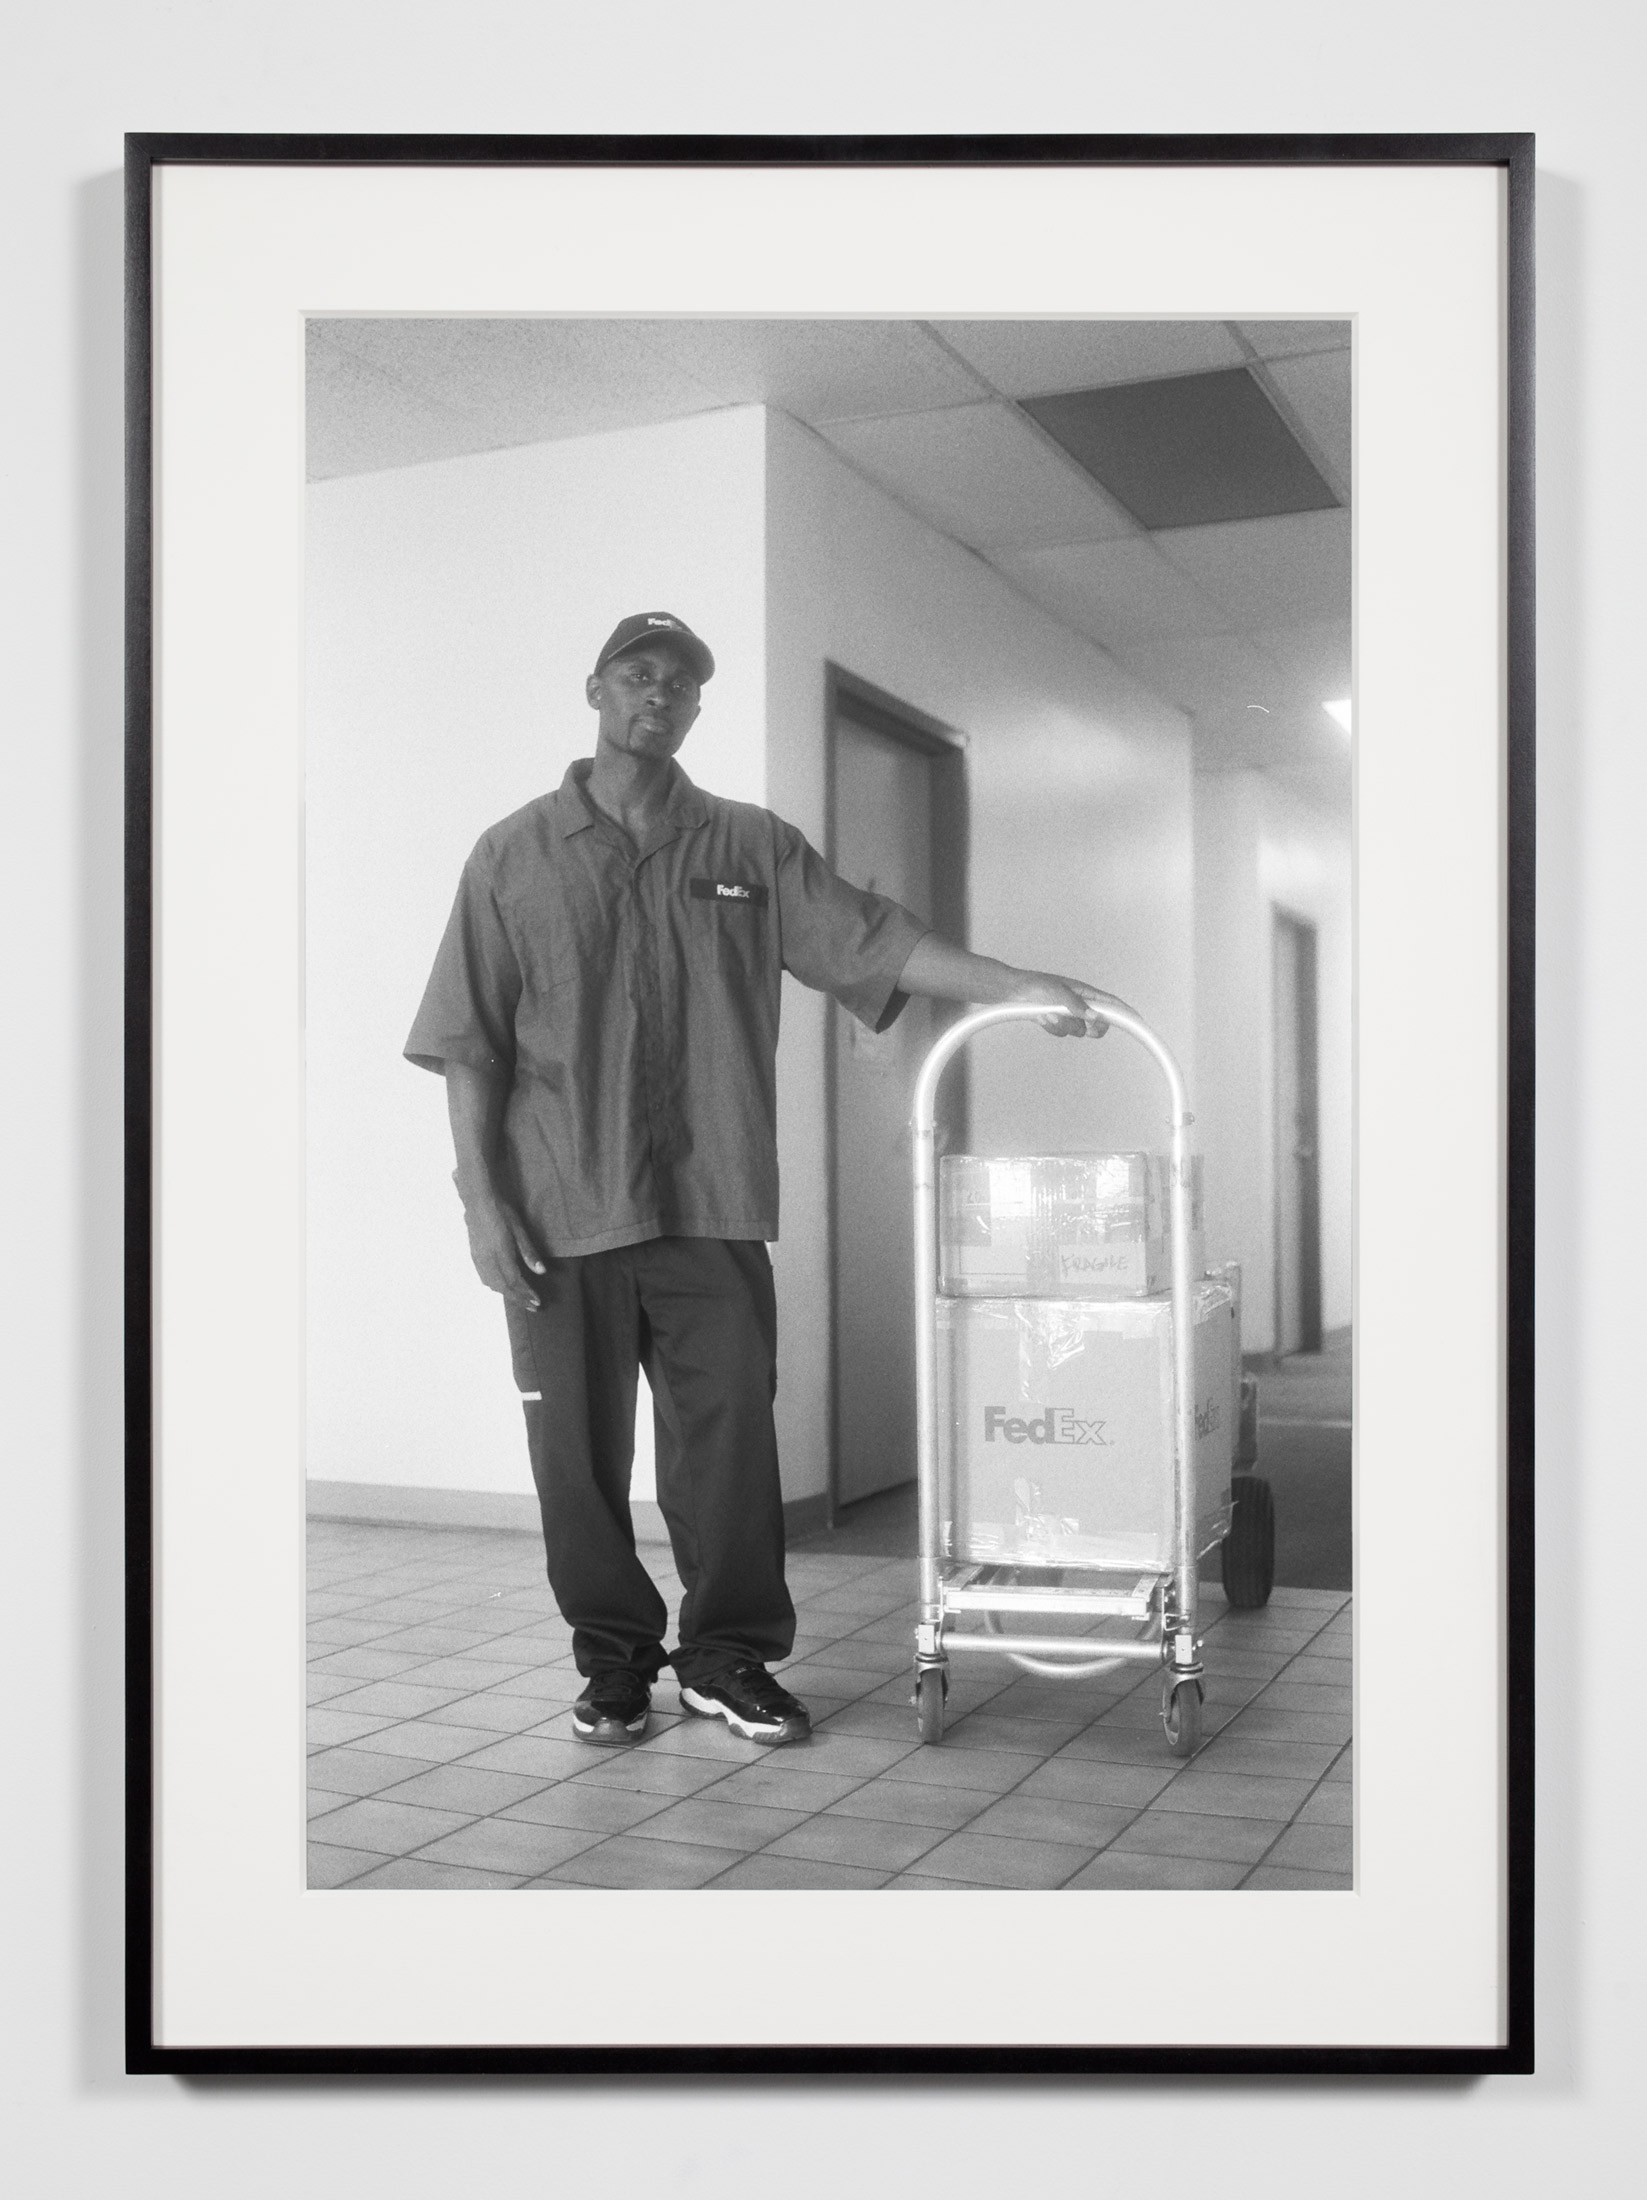   FedEx Courier (DE), Los Angeles, California, September 12, 2008    2009   Epson Ultrachrome K3 archival ink jet print on Hahnemühle Photo Rag paper  36 3/8 x 26 3/8 inches   Industrial Portraits, 2008–     